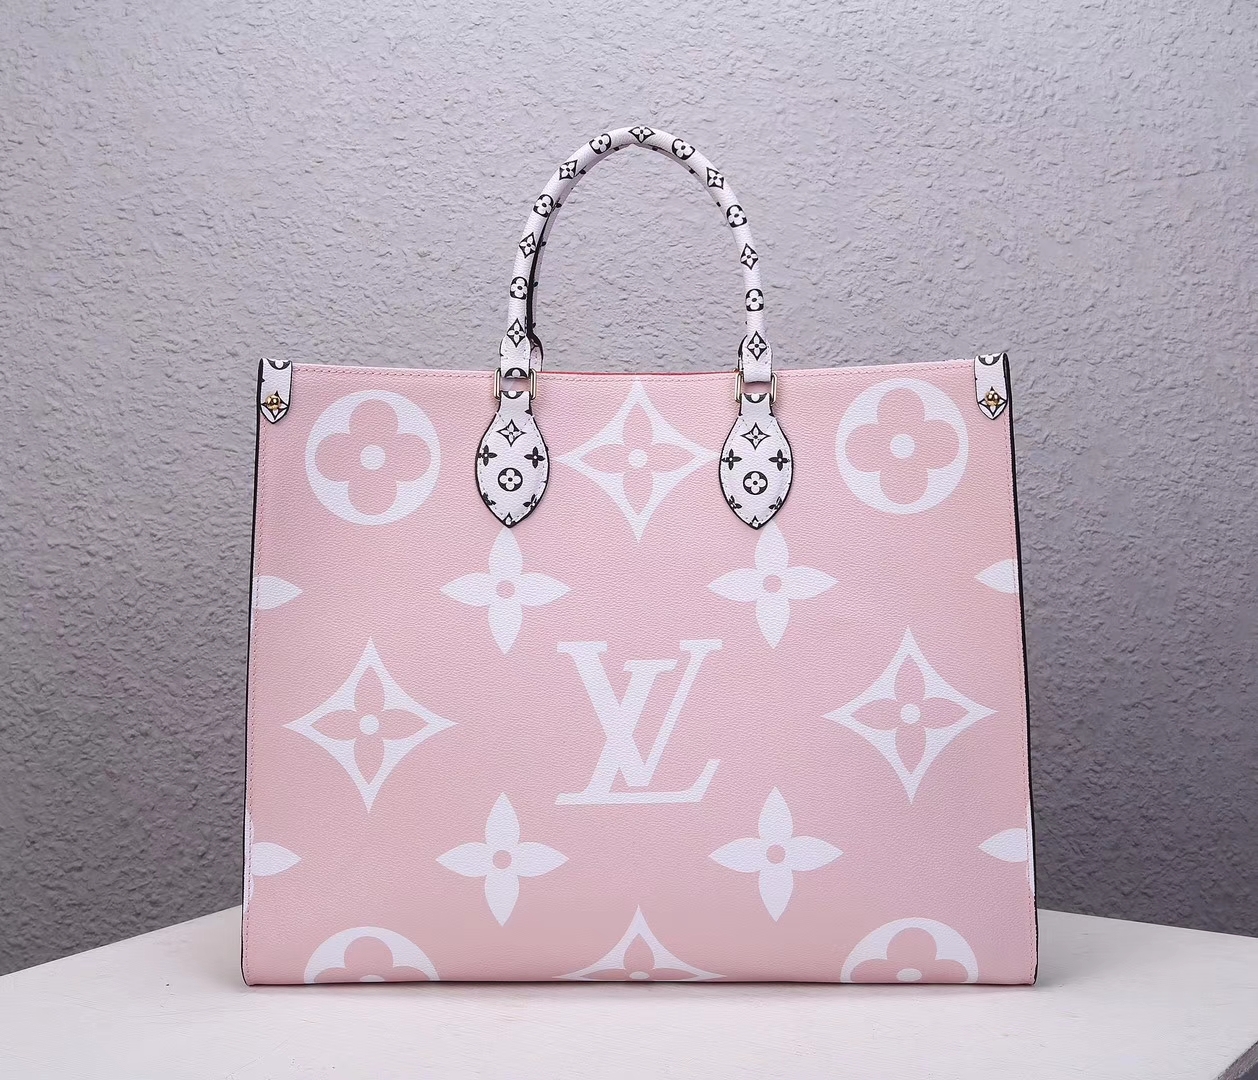 Louis Vuitton On The Go Bag Reviewed | NAR Media Kit